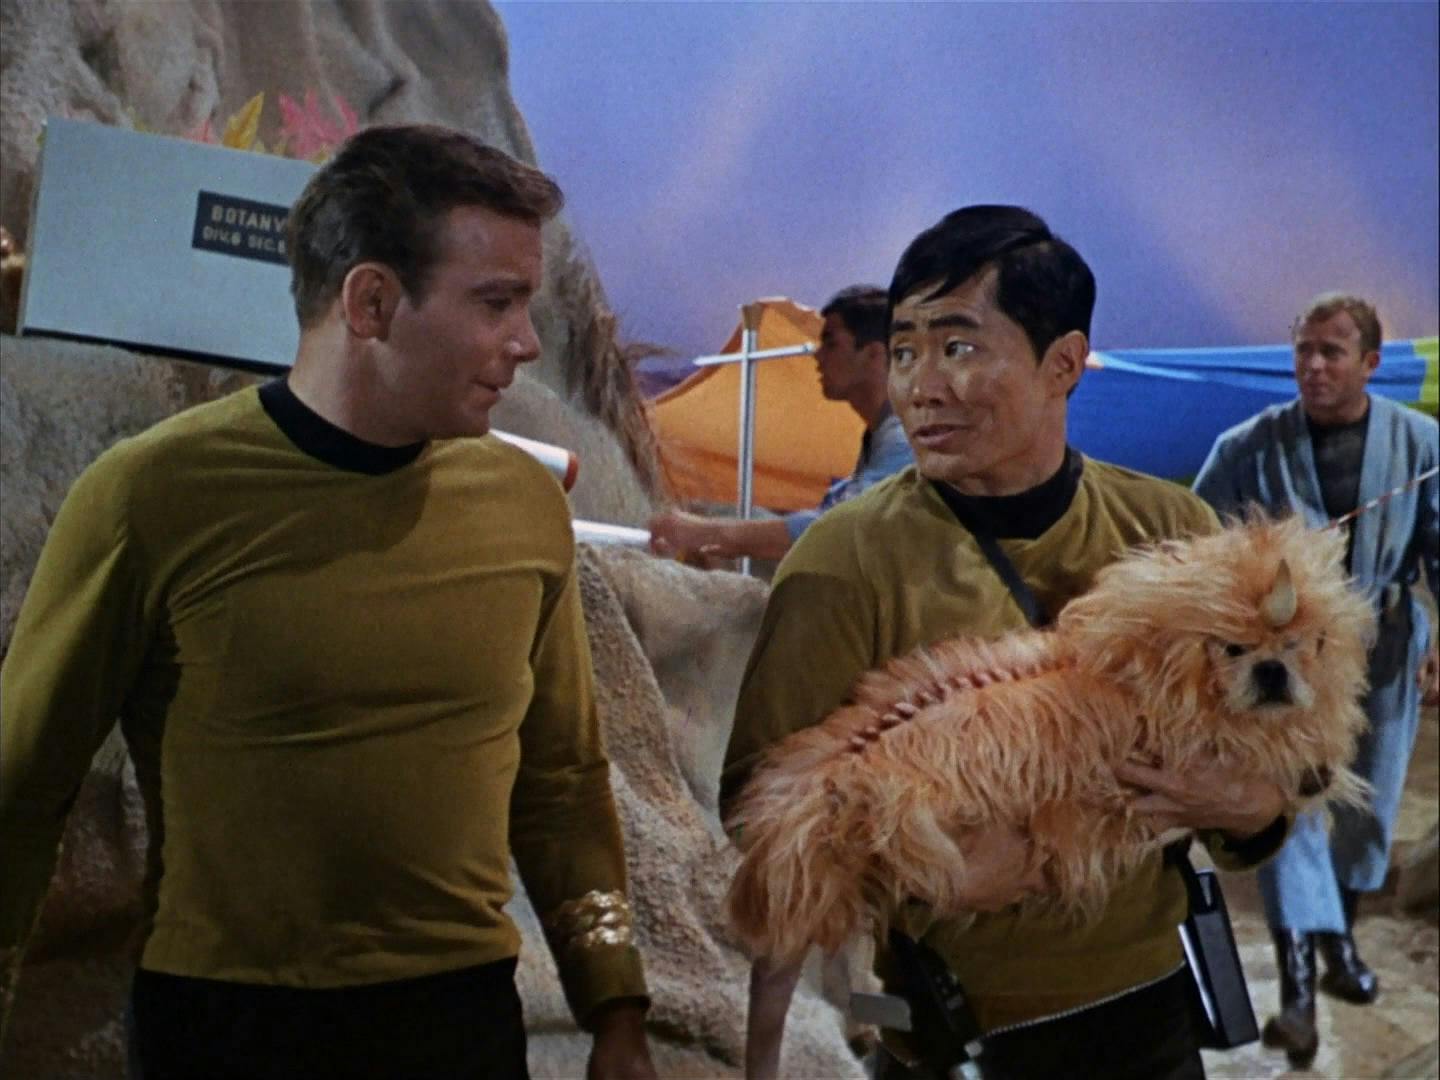 Captain Kirk and Sulu (The Original Series) stand on a planet. Sulu is holding an alien dog in his arms. Both men are smiling.